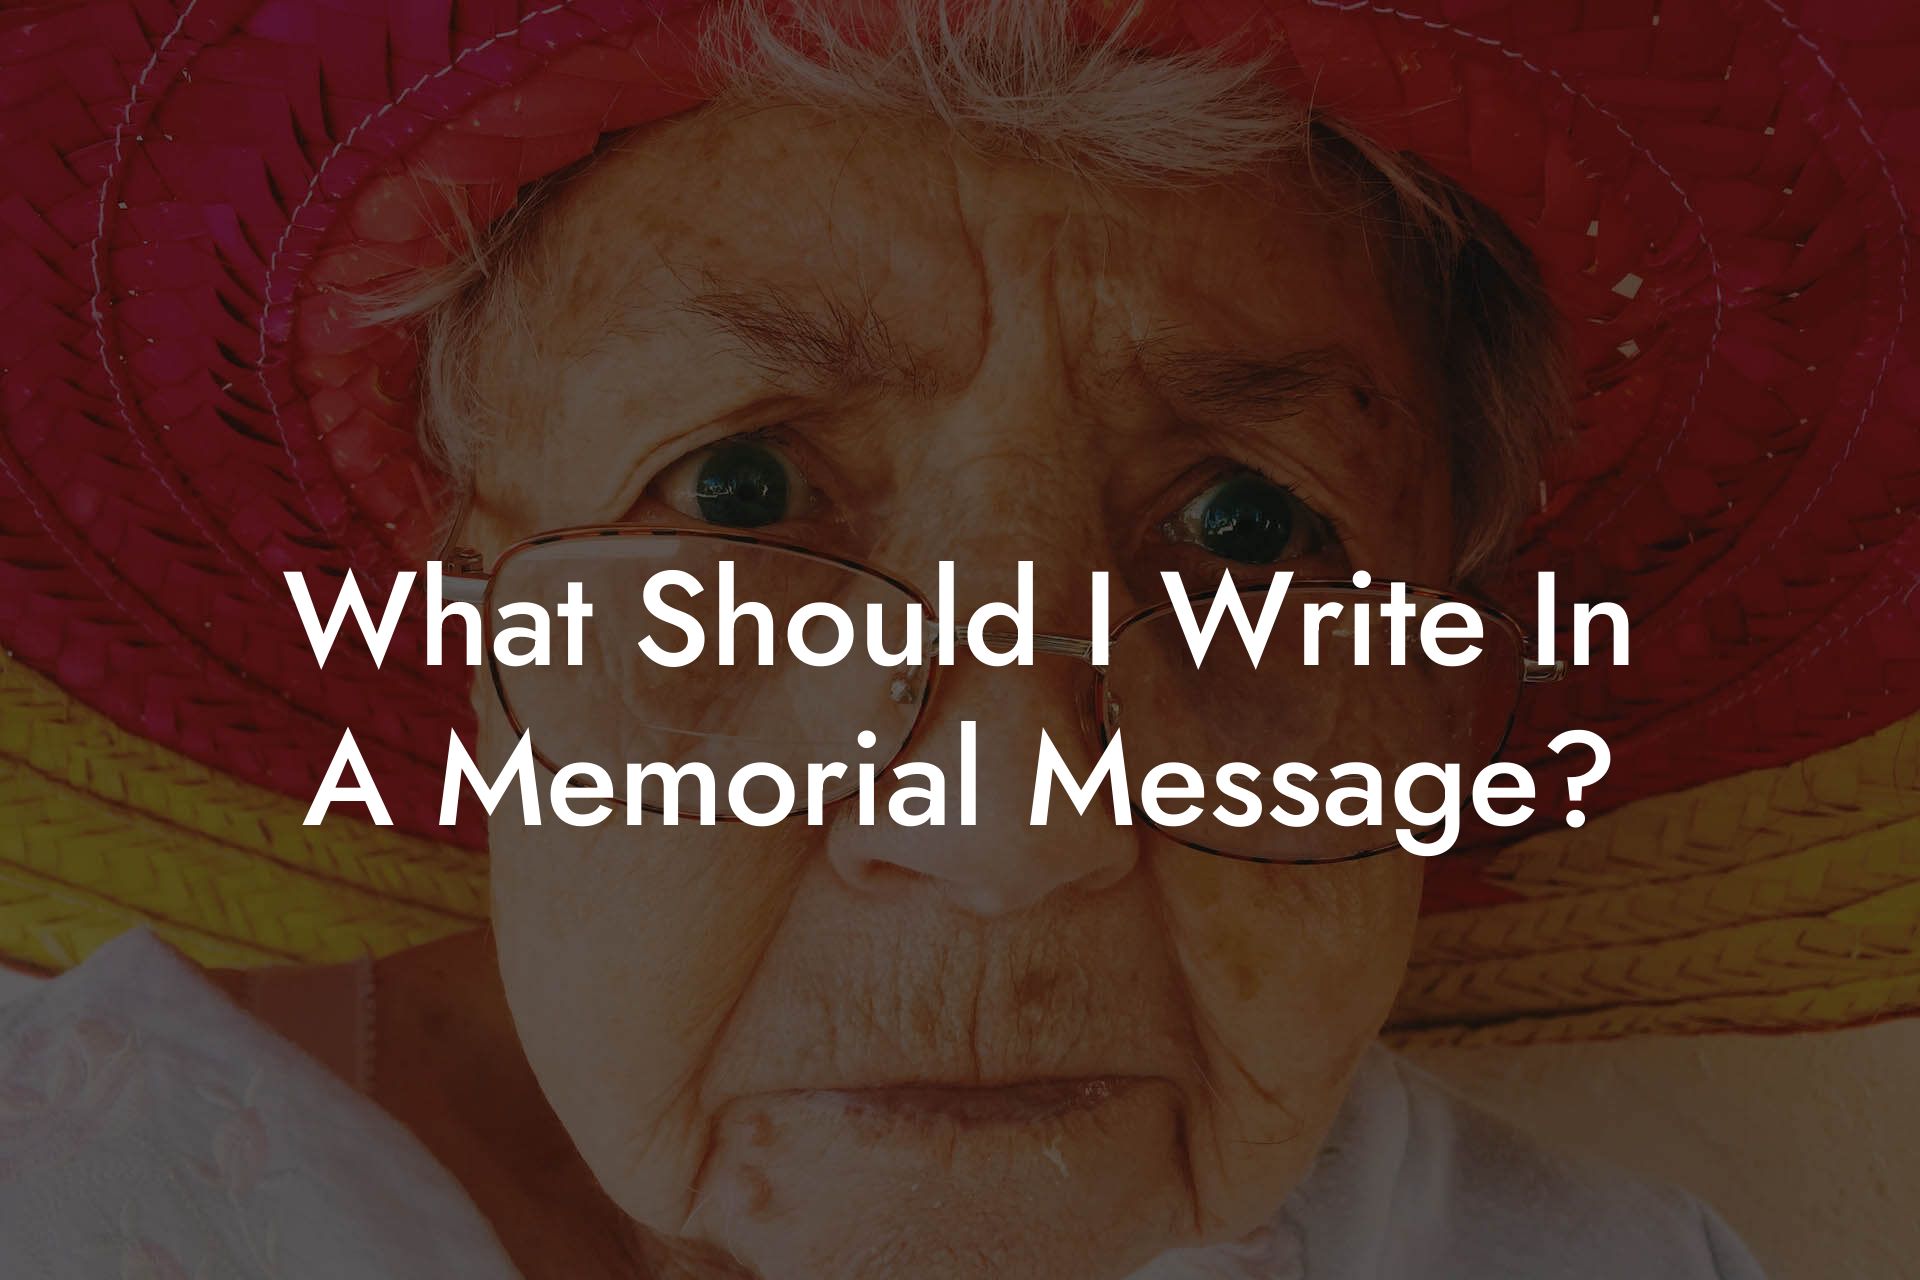 What Should I Write In A Memorial Message?